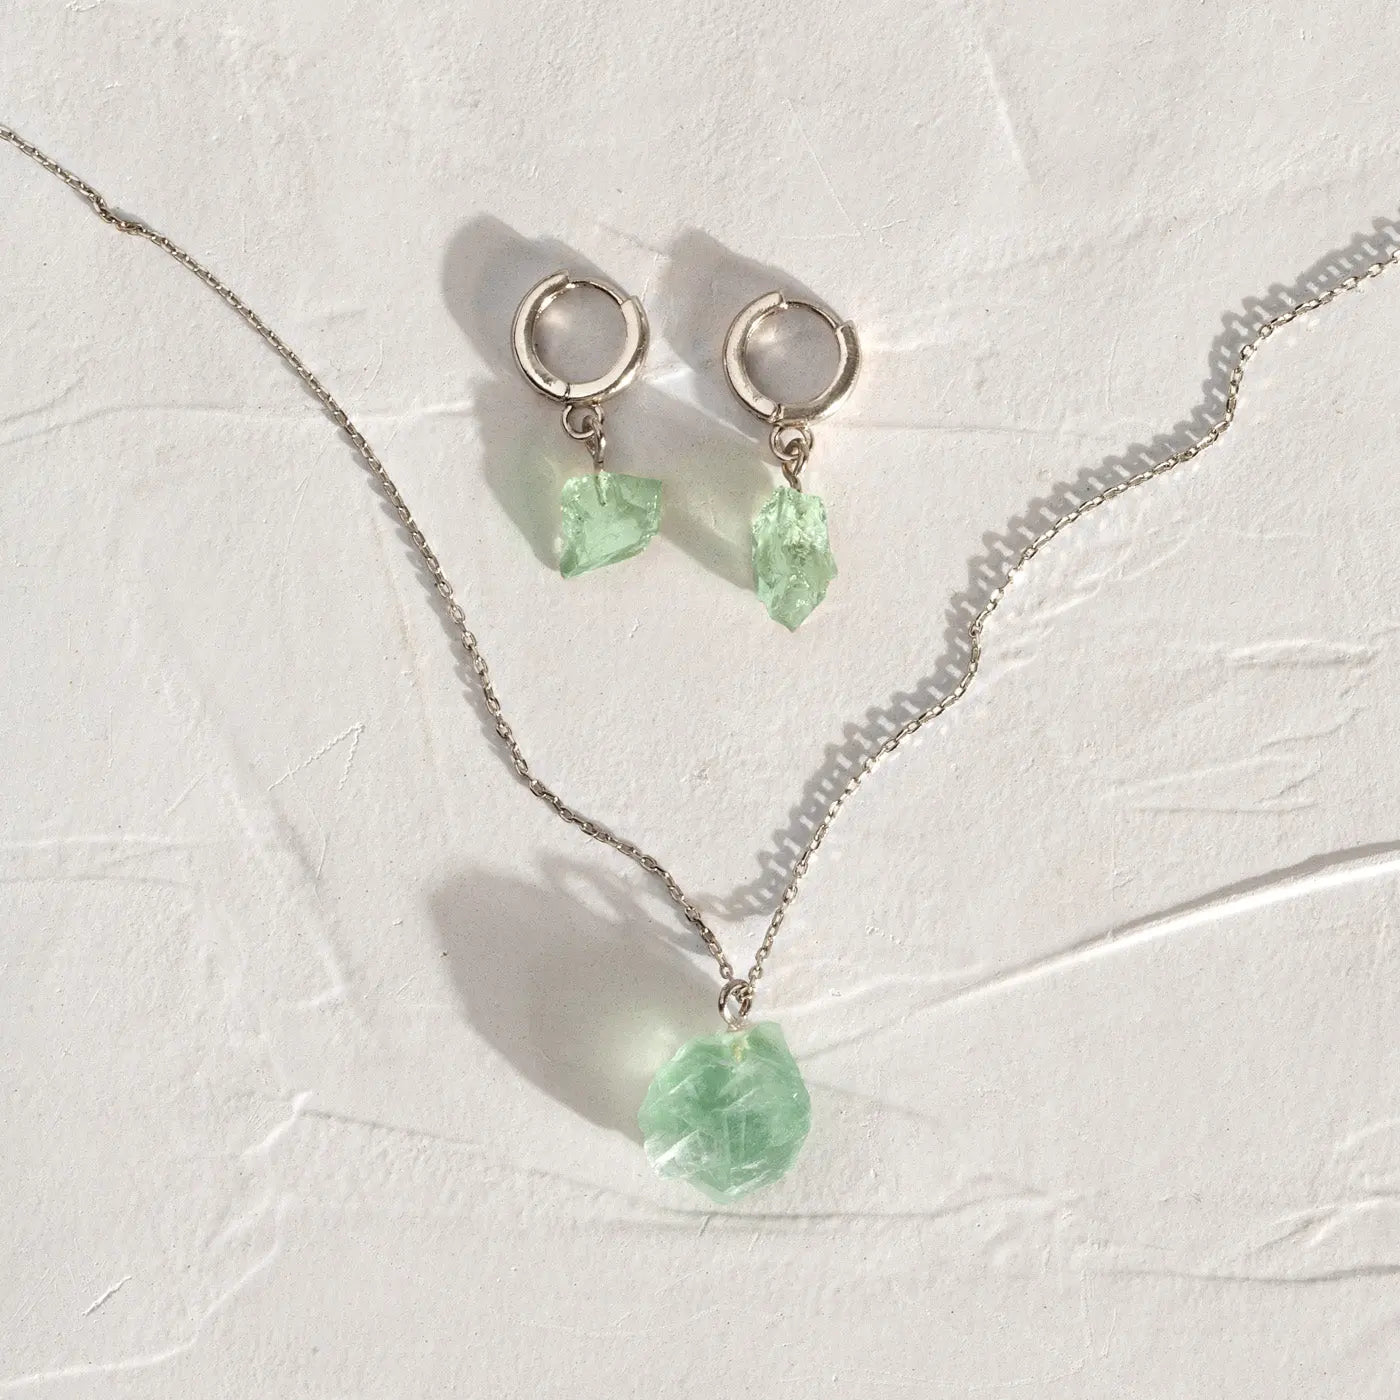 Semi Precious Stone Set with Necklace and Earrings - Silver